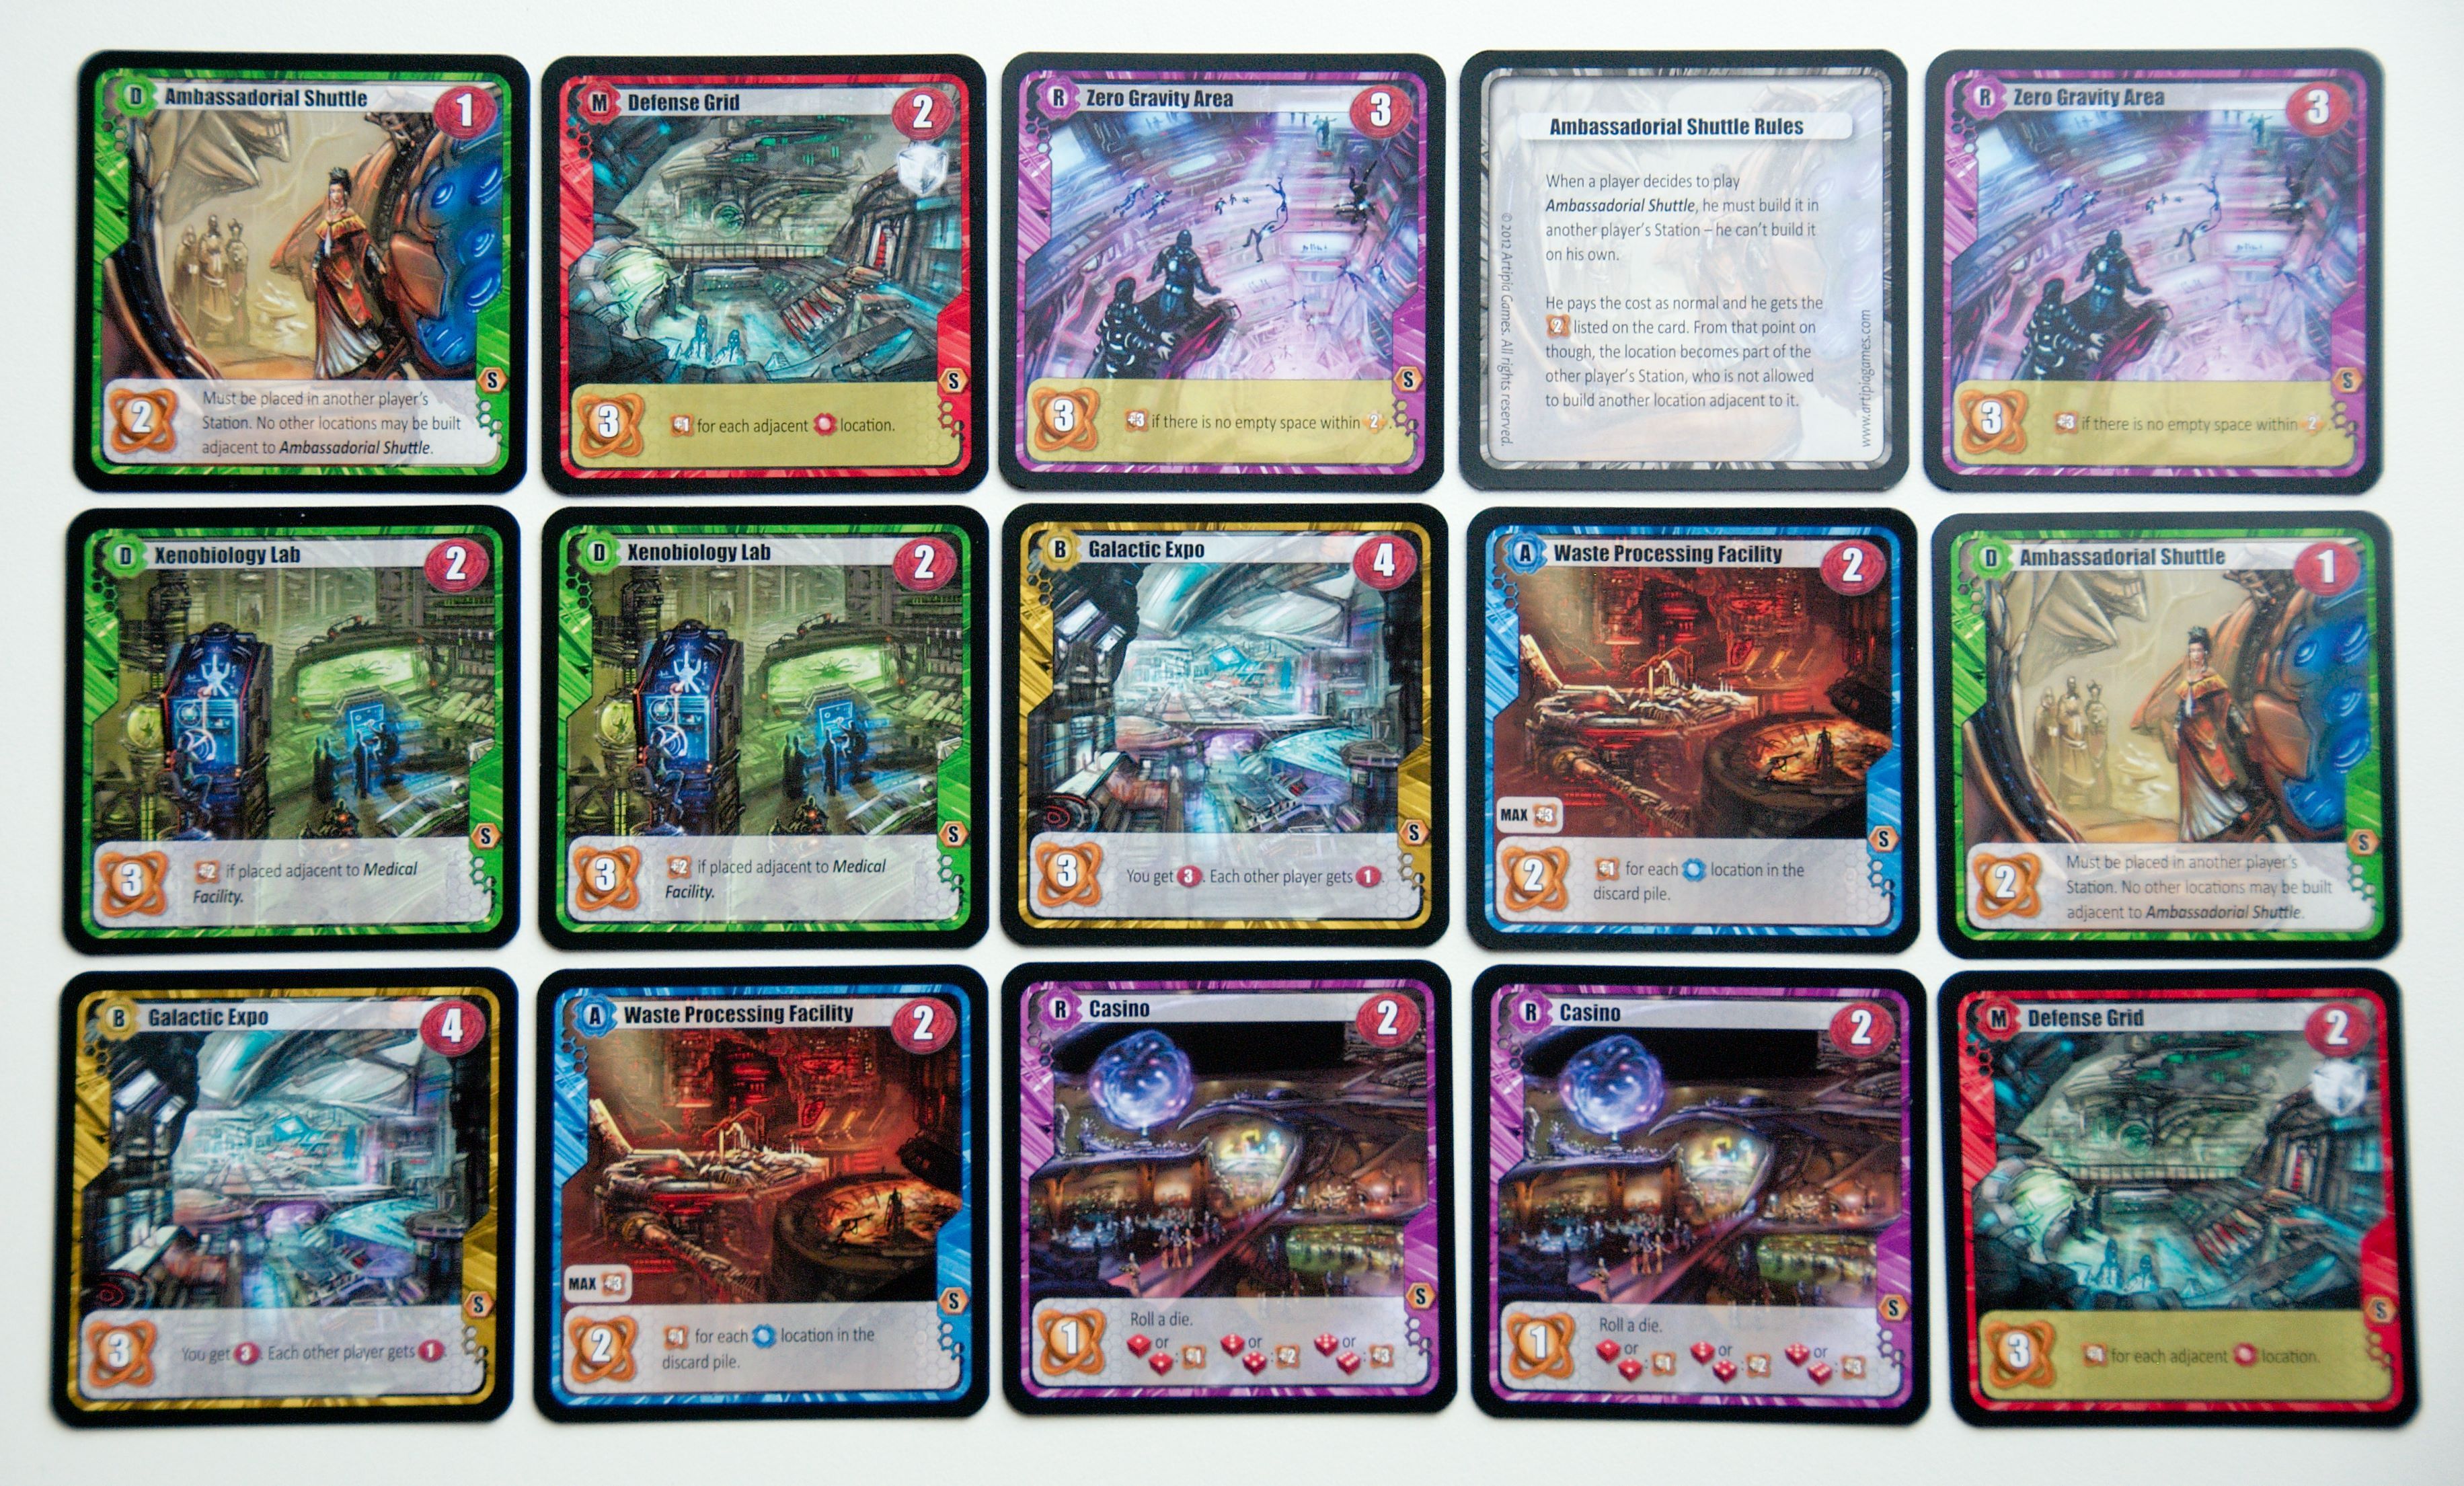 Among the Stars: Pre-order Promo Cards